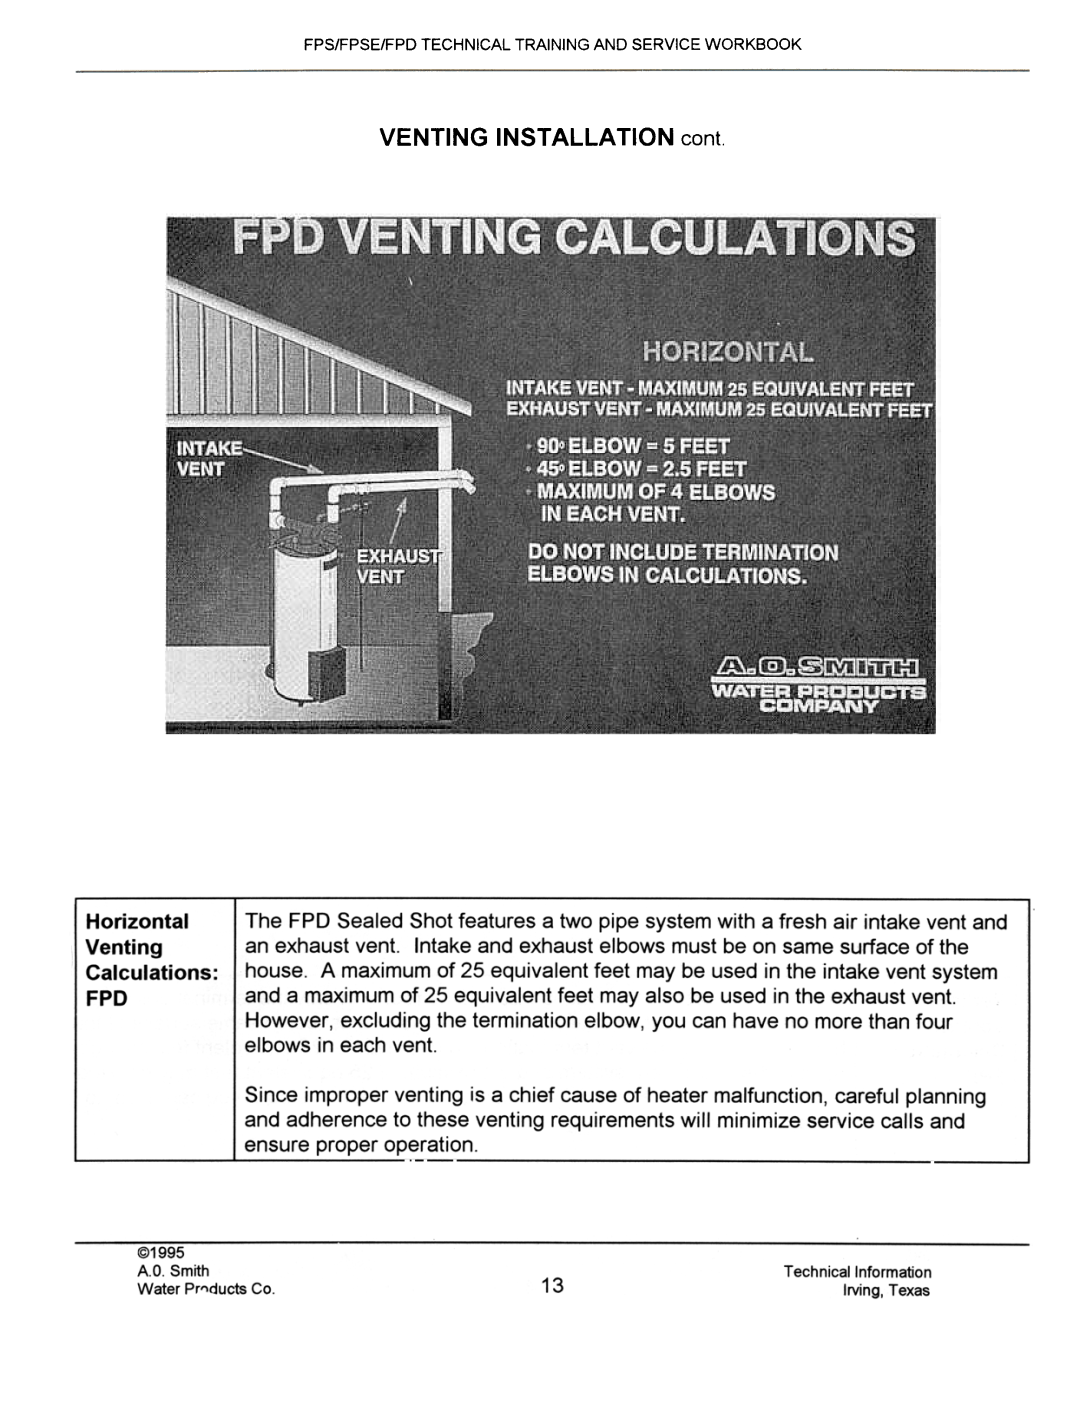 A.O. Smith FPS40, FPSE50, fps50, FPS 75 manual VENTING INSTAllATION cant, Fps/Fpse/Fpd Technical Training And Service Workbook 